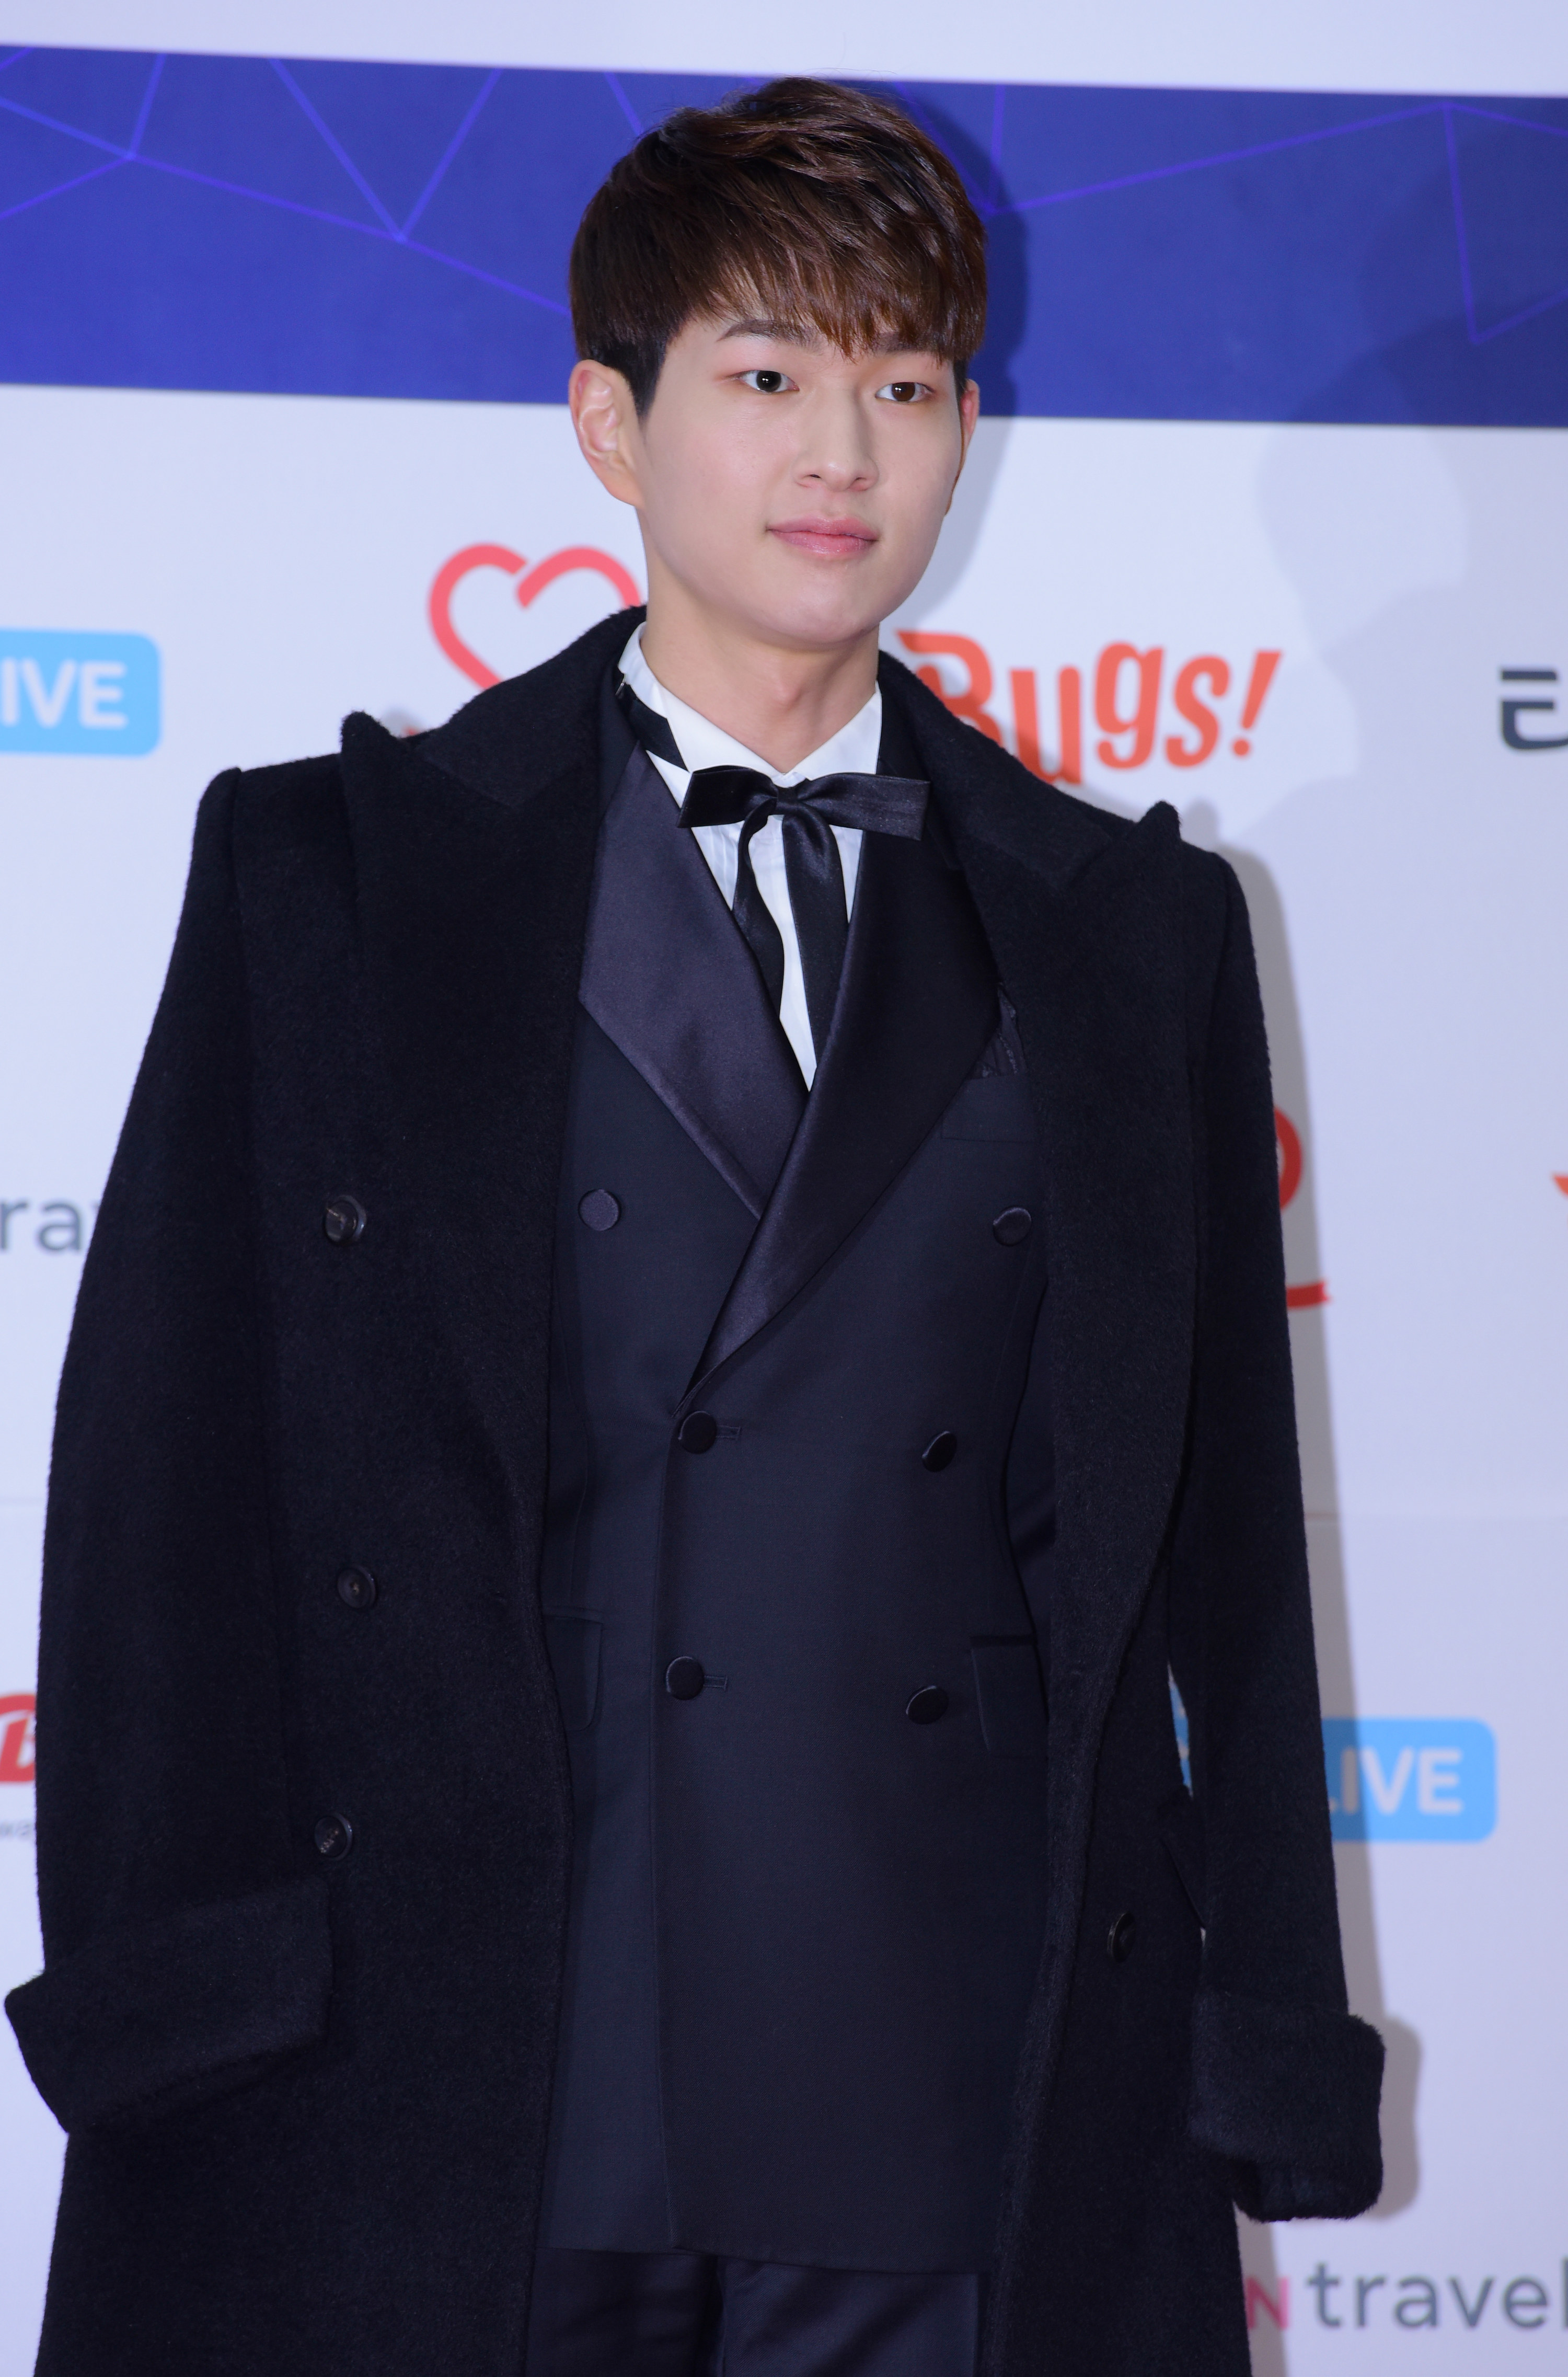 Onew in a smart suit with a coat over it, looking to be at a red carpet event